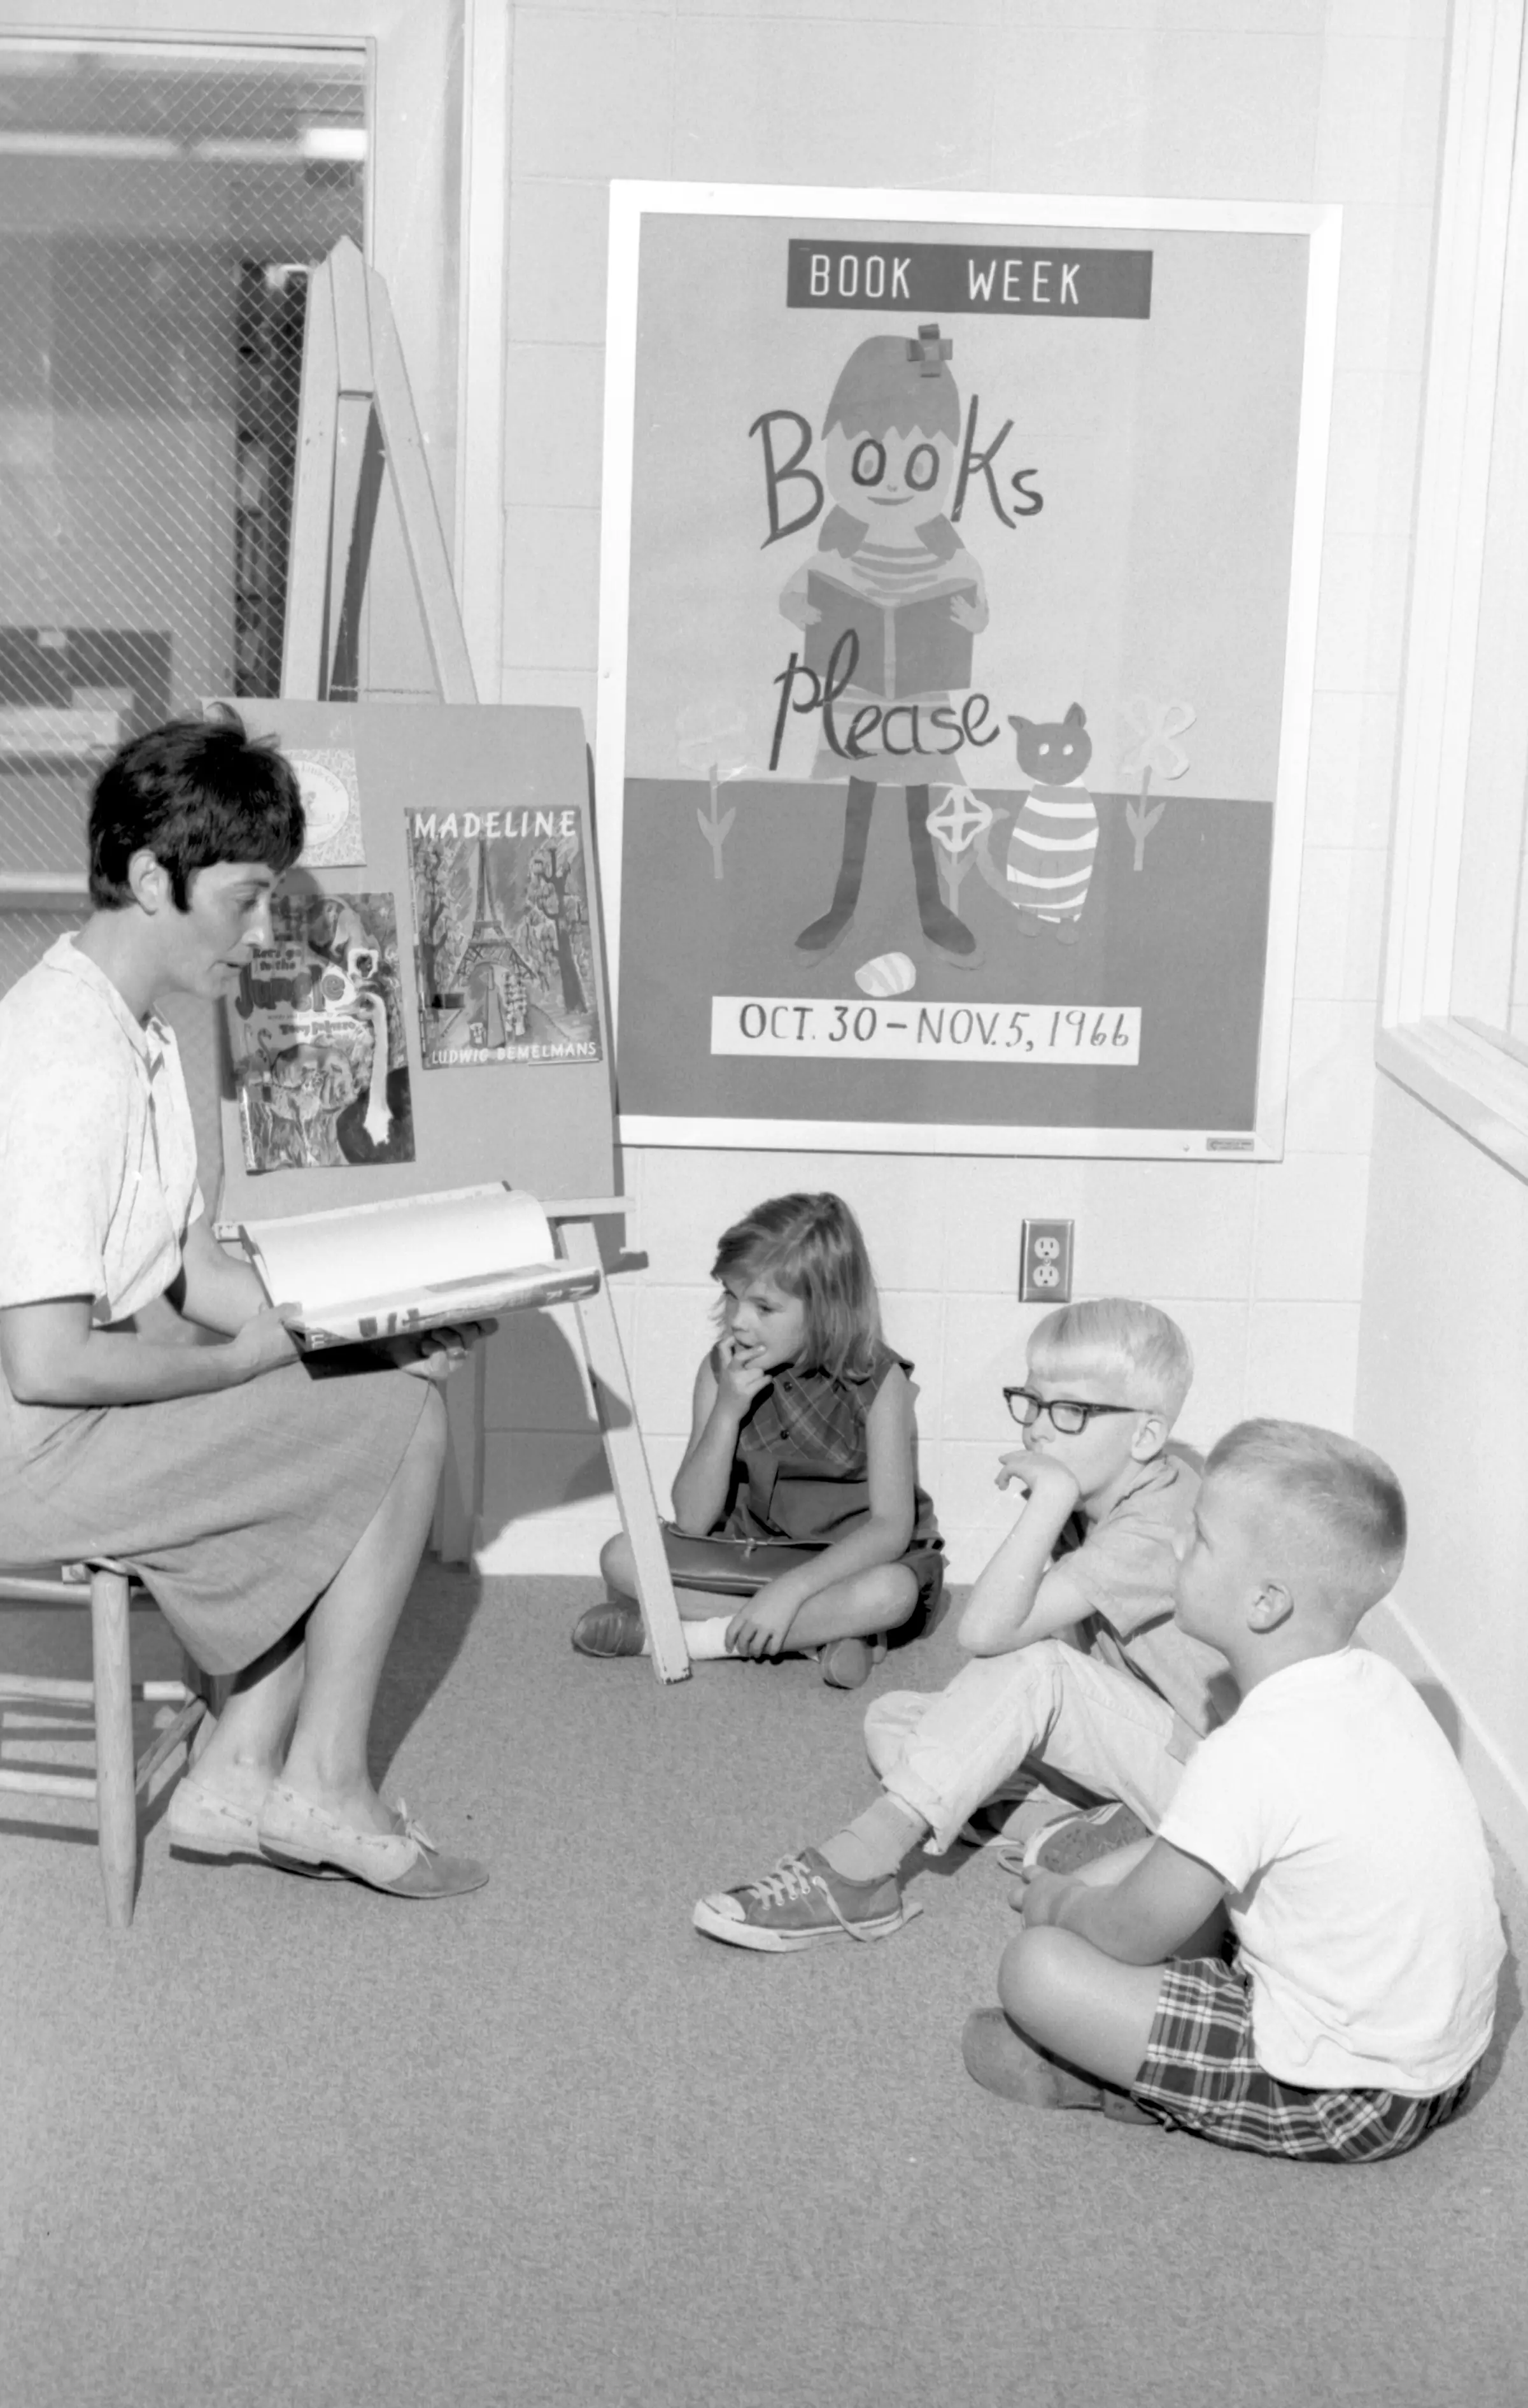 Archival Photo of Storytime at the Leon County Public Library